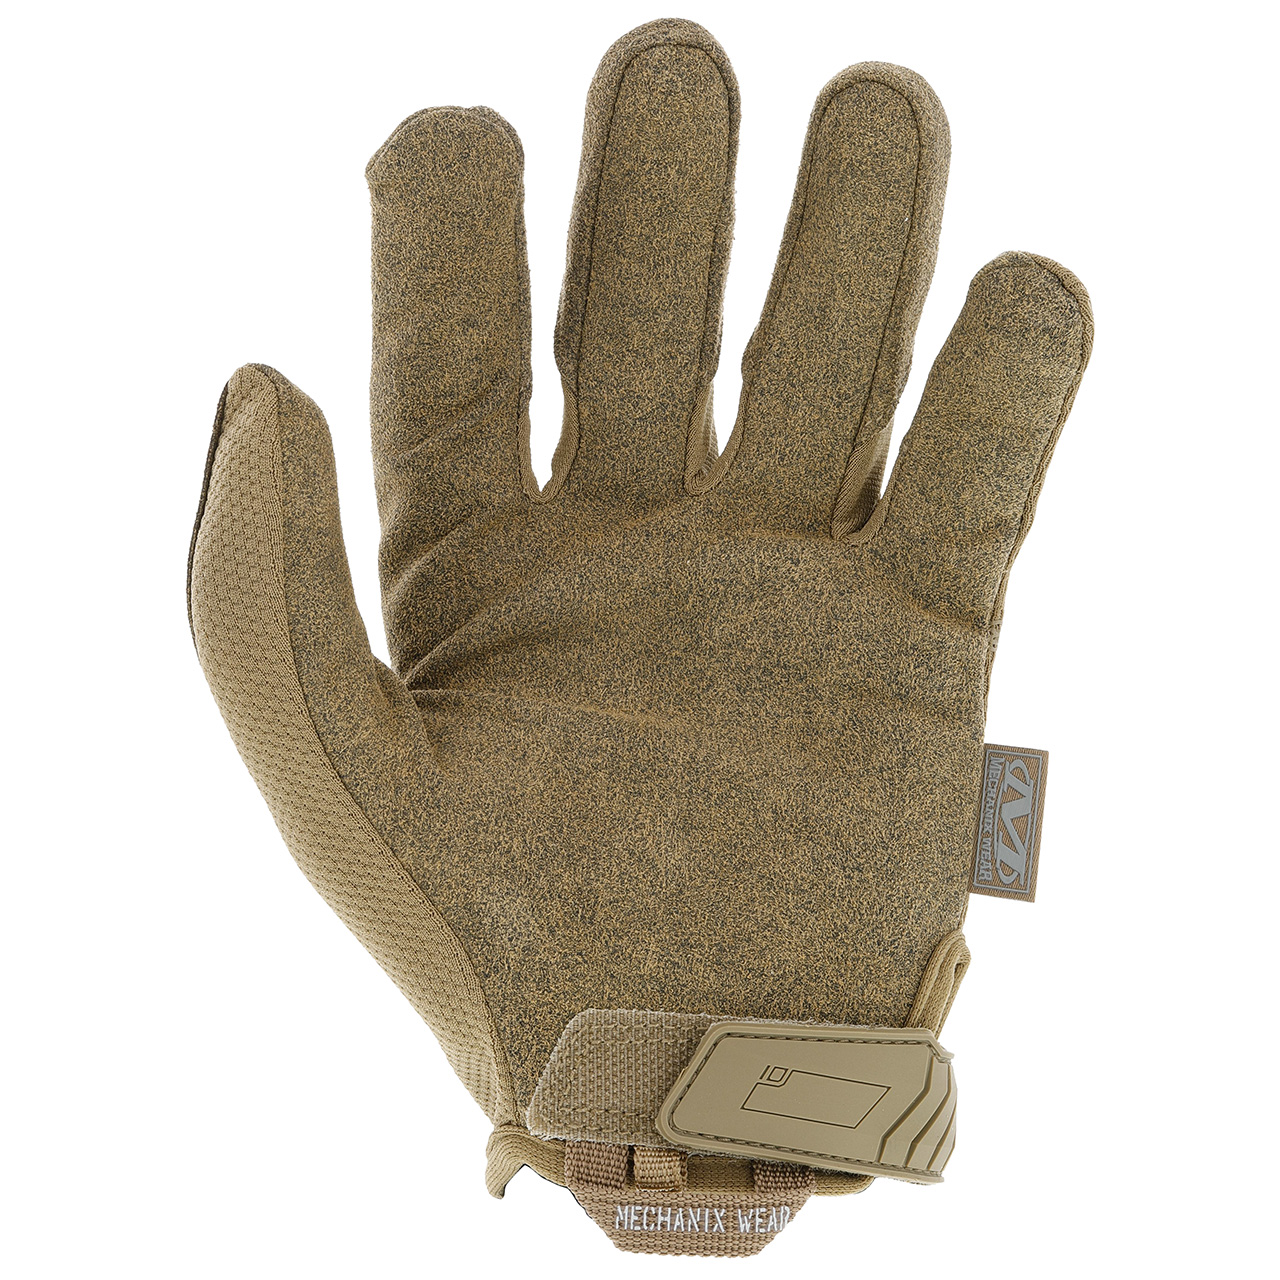 Military Lightweight US Army Mechanics Work Gloves, Army - Coyote / XL